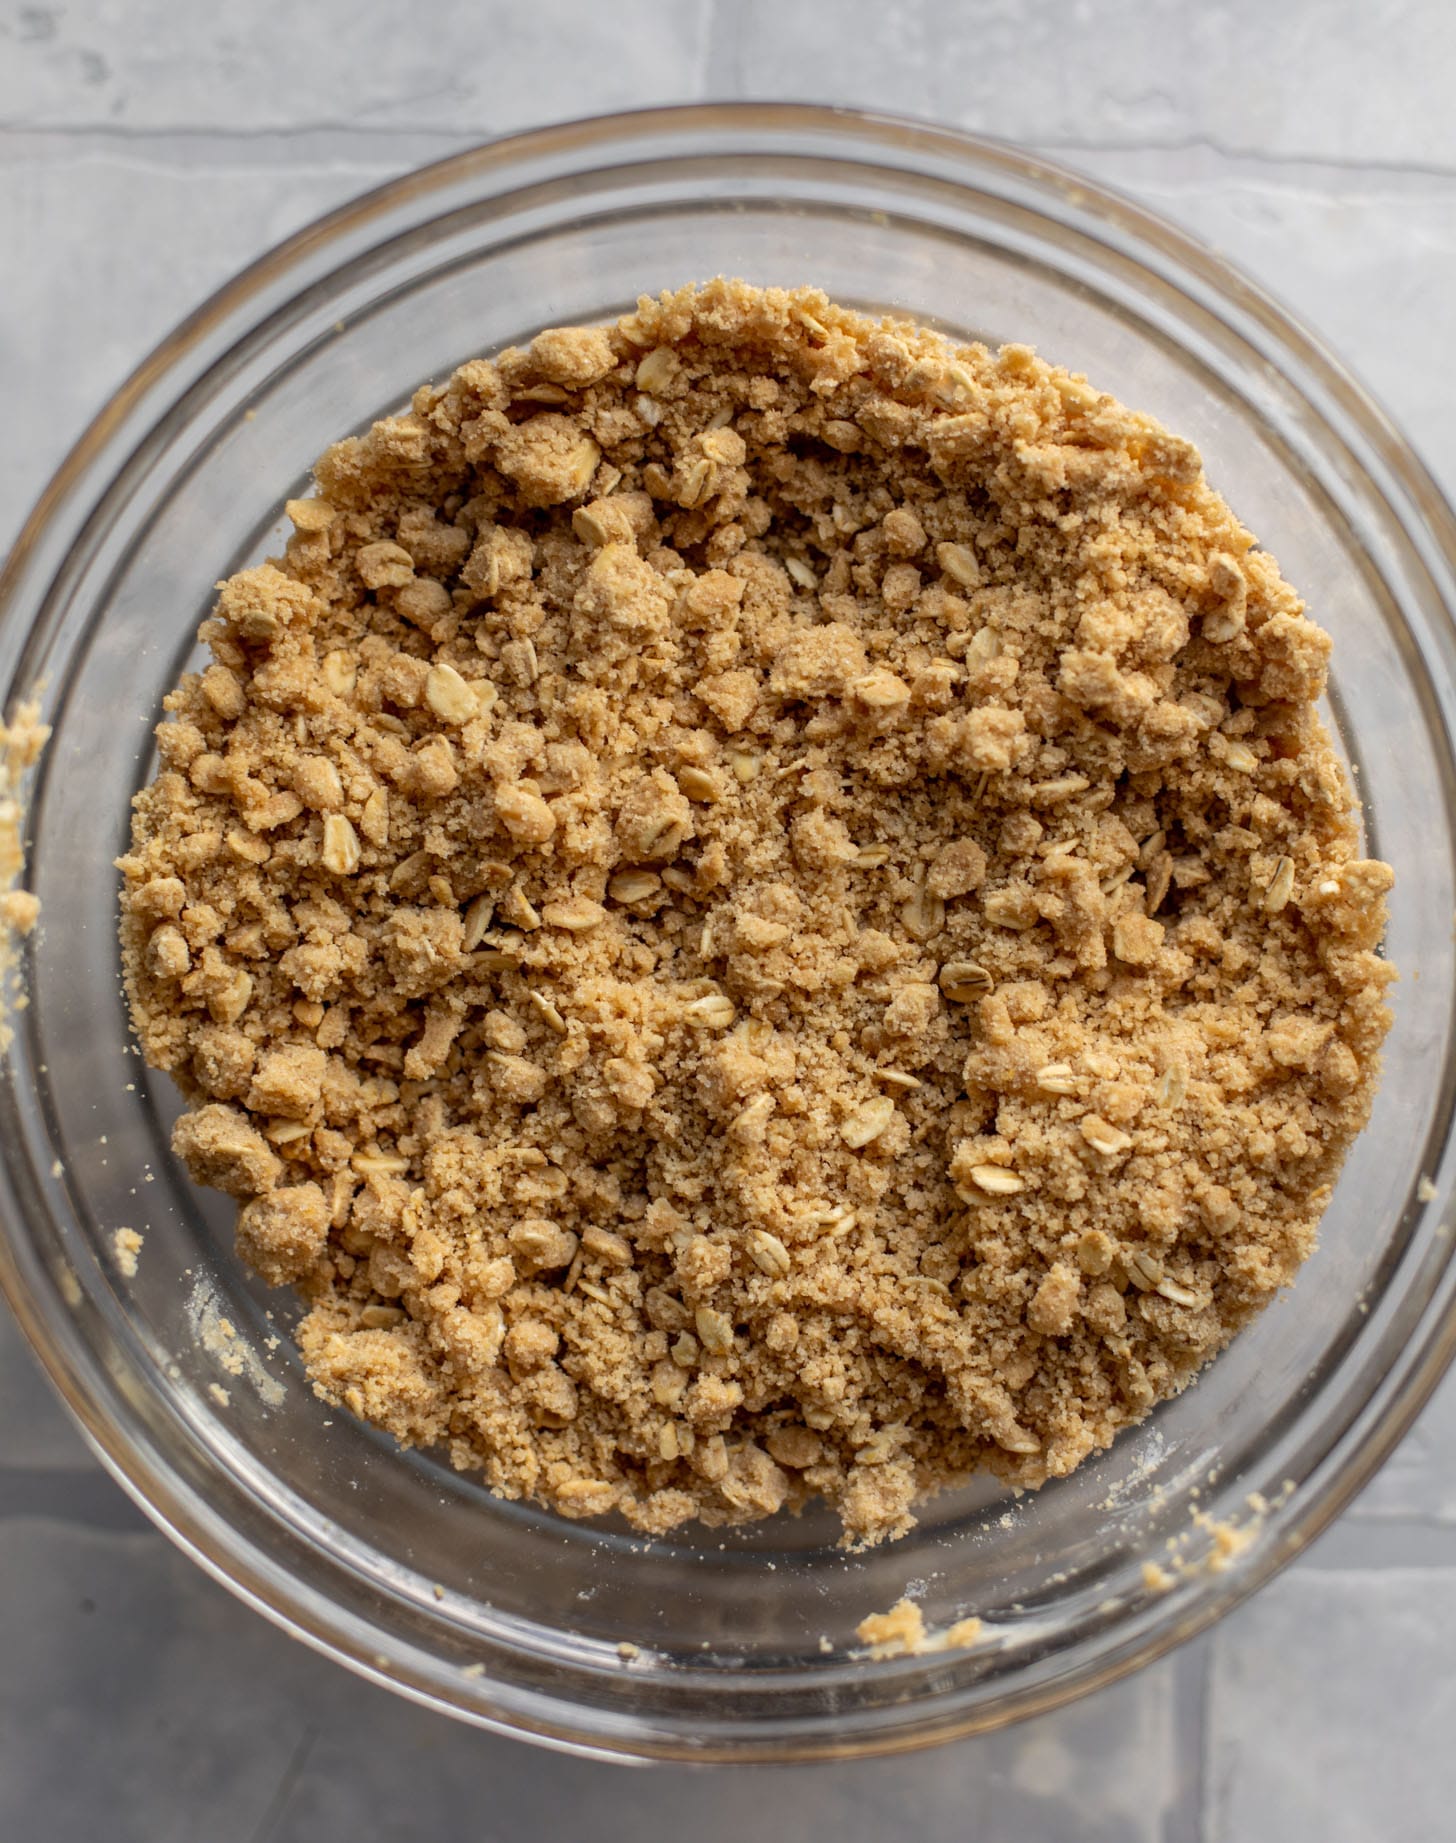 peanut butter crumble